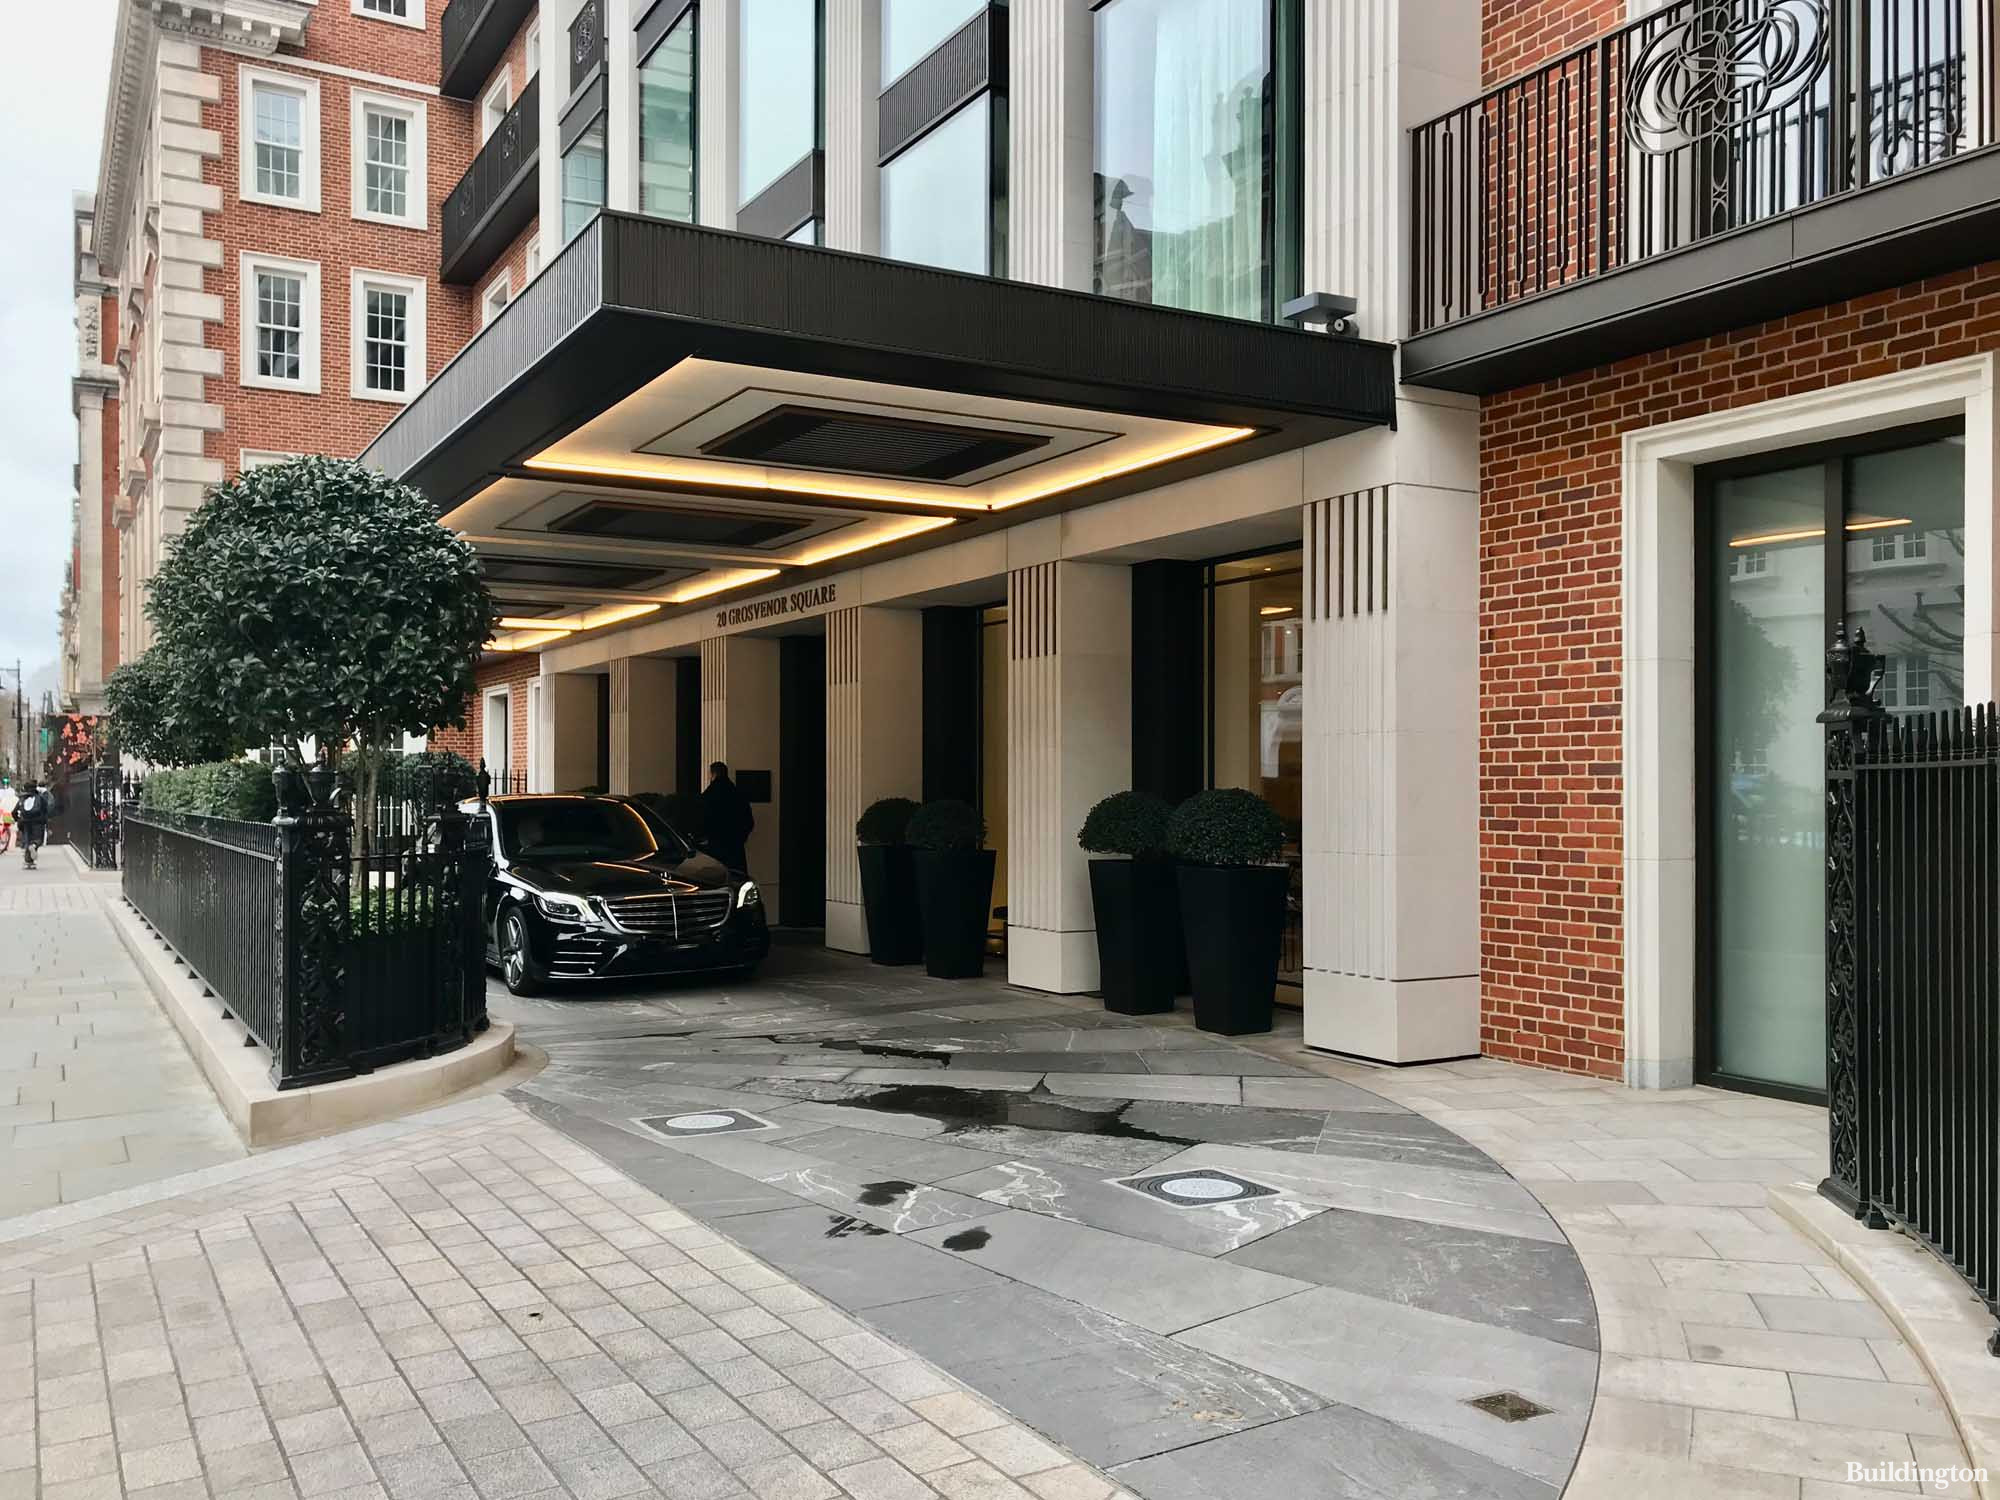 Twenty Grosvenor Square entrance on North Audley Square in Mayfair, London W1.